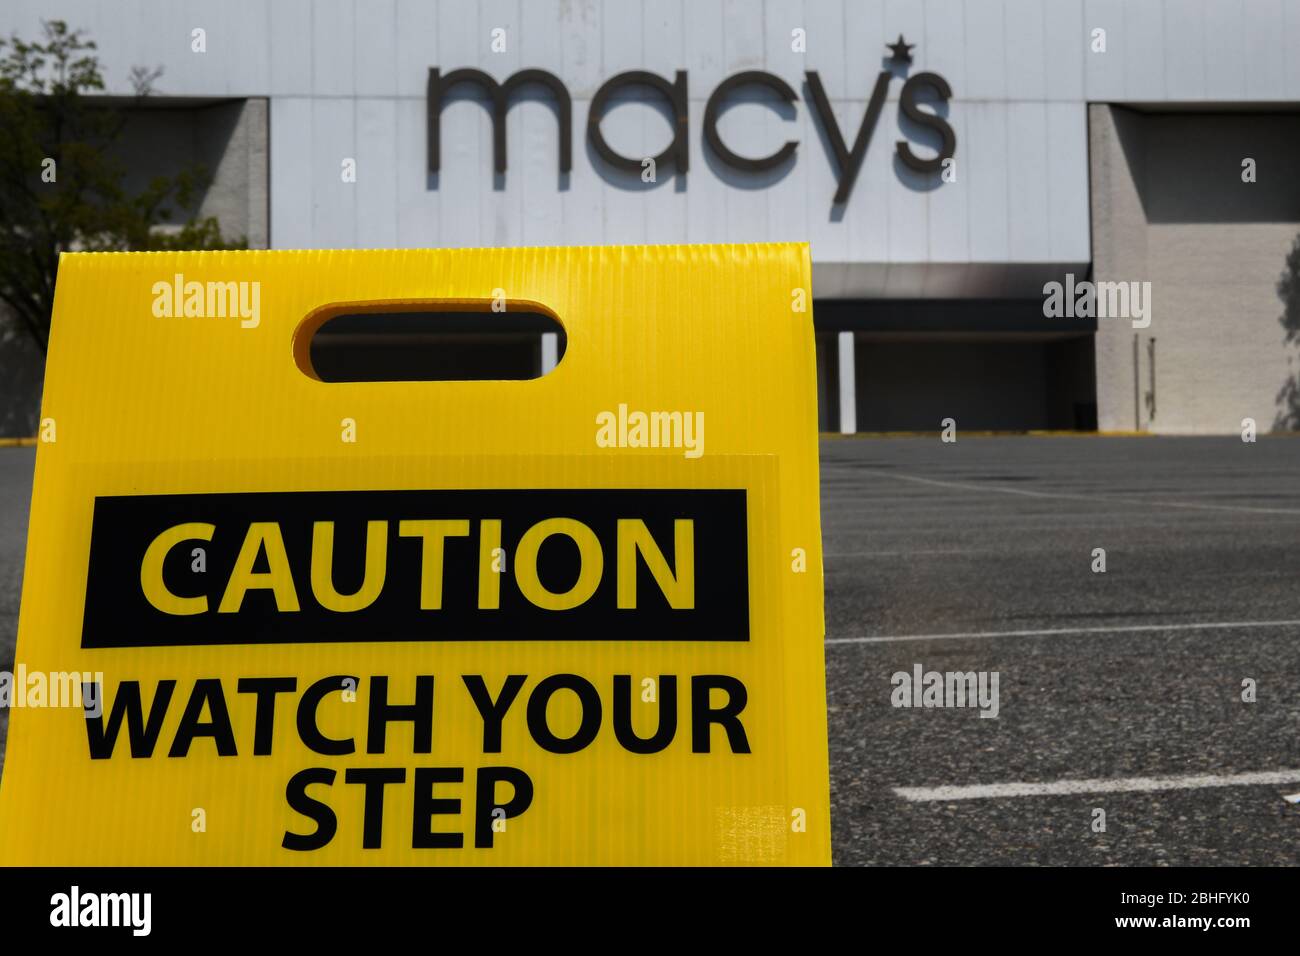 Macys Department stores in danger of going out of business - close to bankruptcy or bankrupt - businesses harmed by Covid-19 depression / recession Stock Photo